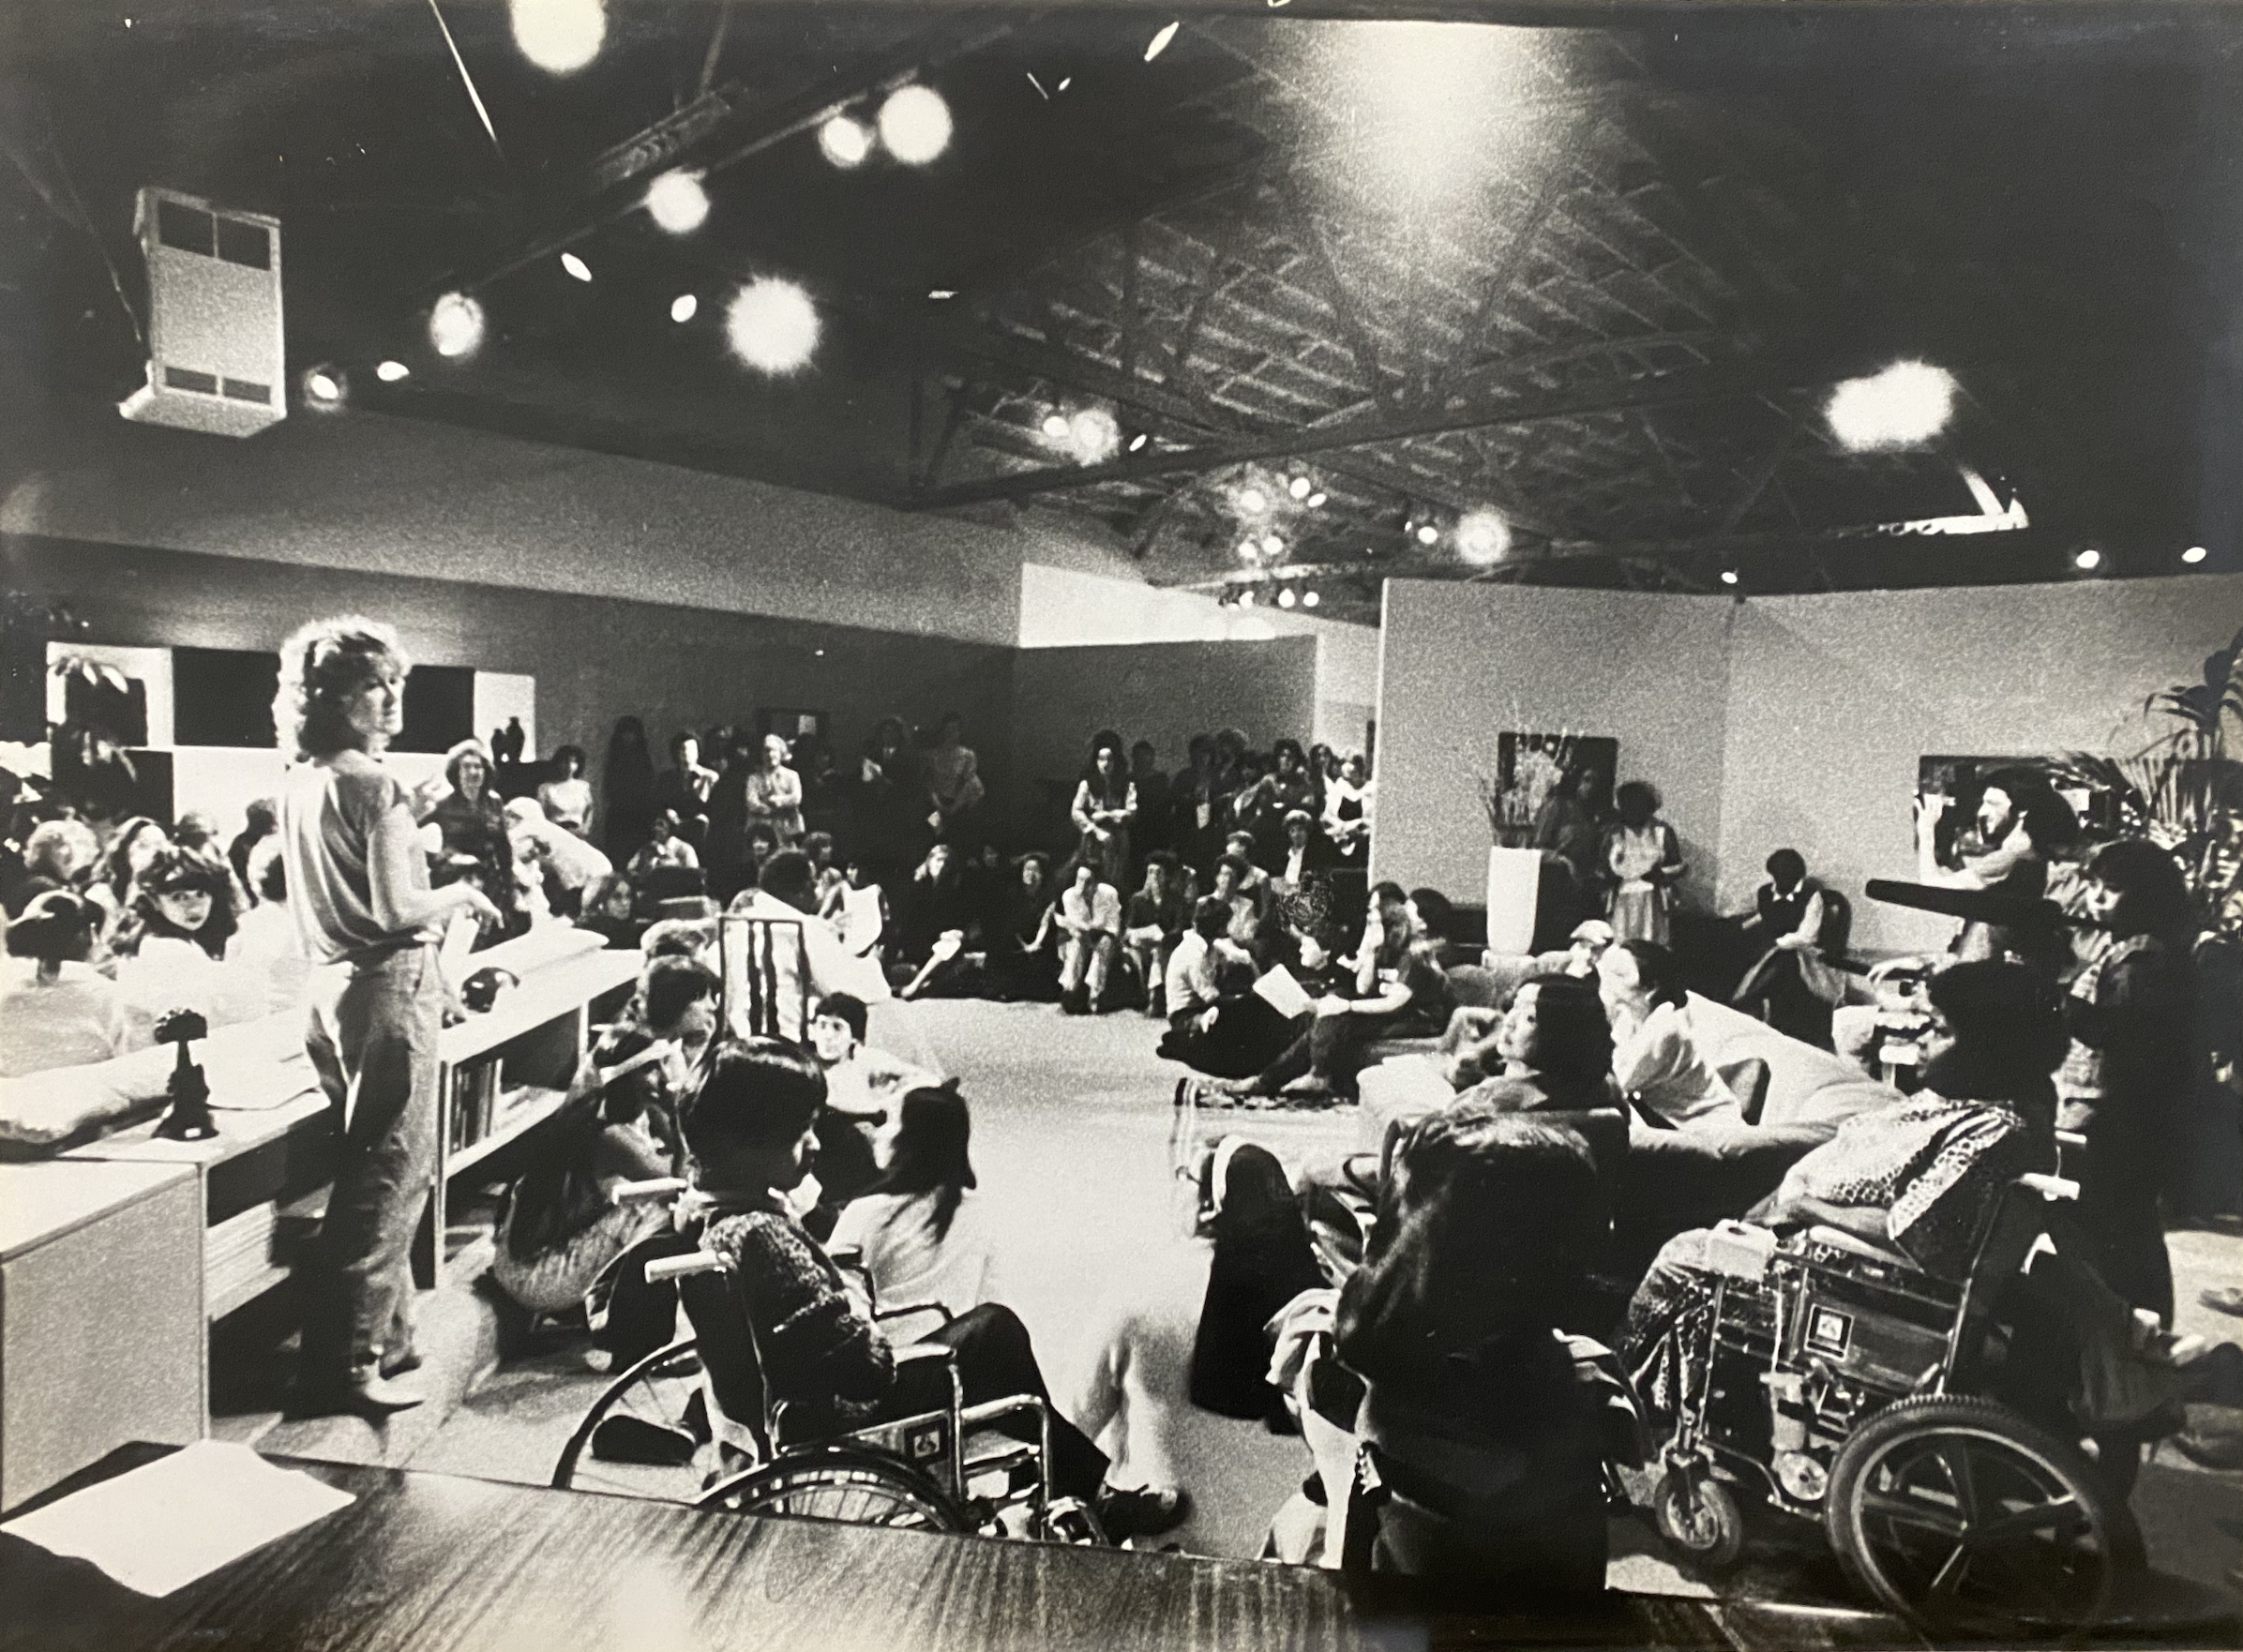 In a black and white image set in the 1970’s , a young Suzanne Lacy stands to the left of the frame overlooking a room full of people. At the forefront are a group of people in wheelchairs, along the sides people are sitting on a couch. In the background people are standing along the room while others are sitting on the floor creating an oblong empty space in the center.